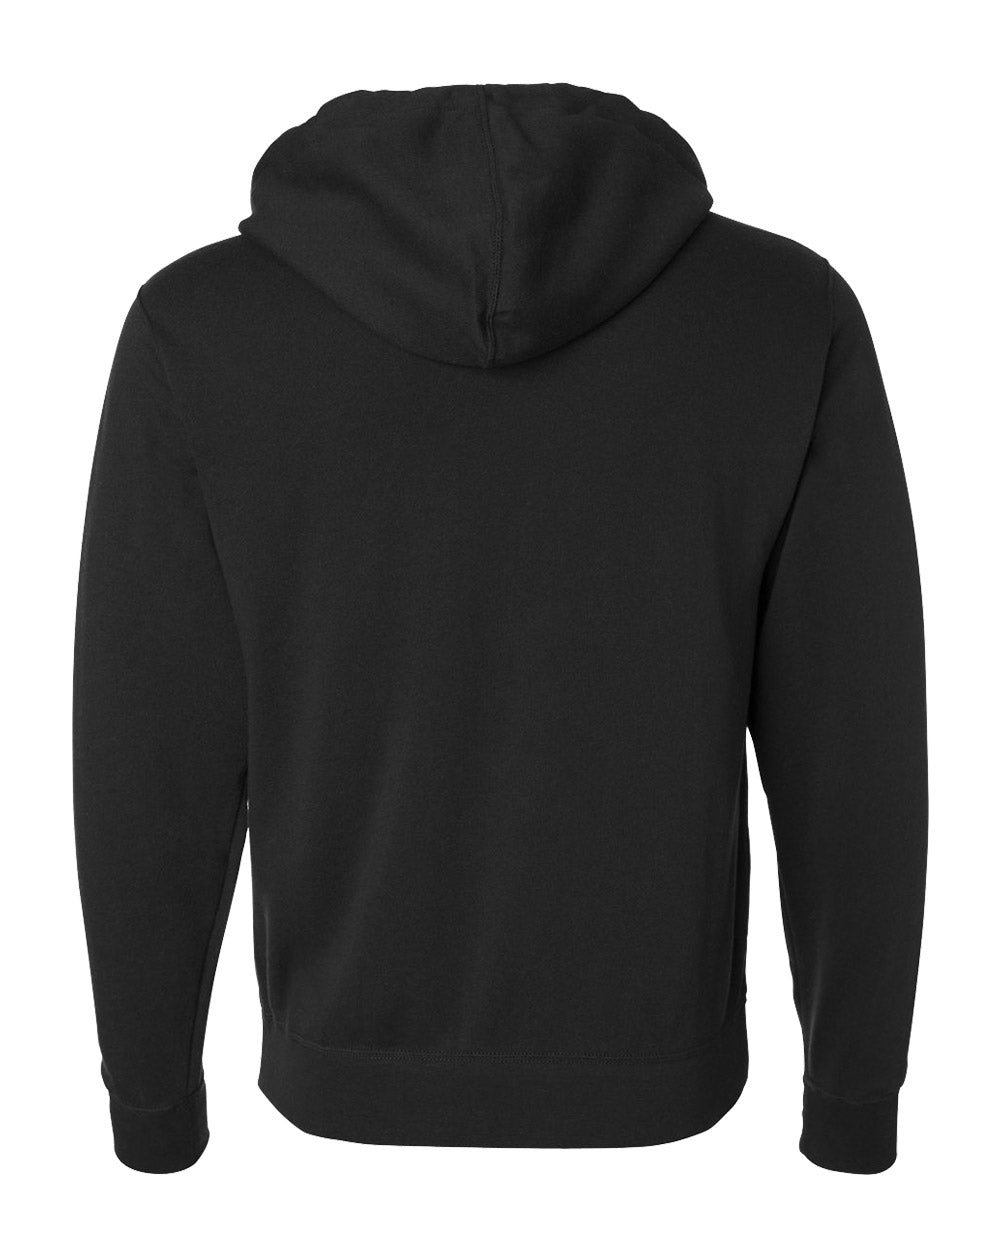 Strength (Waves) Pullover Hoodie - Black - Conquering Barbell